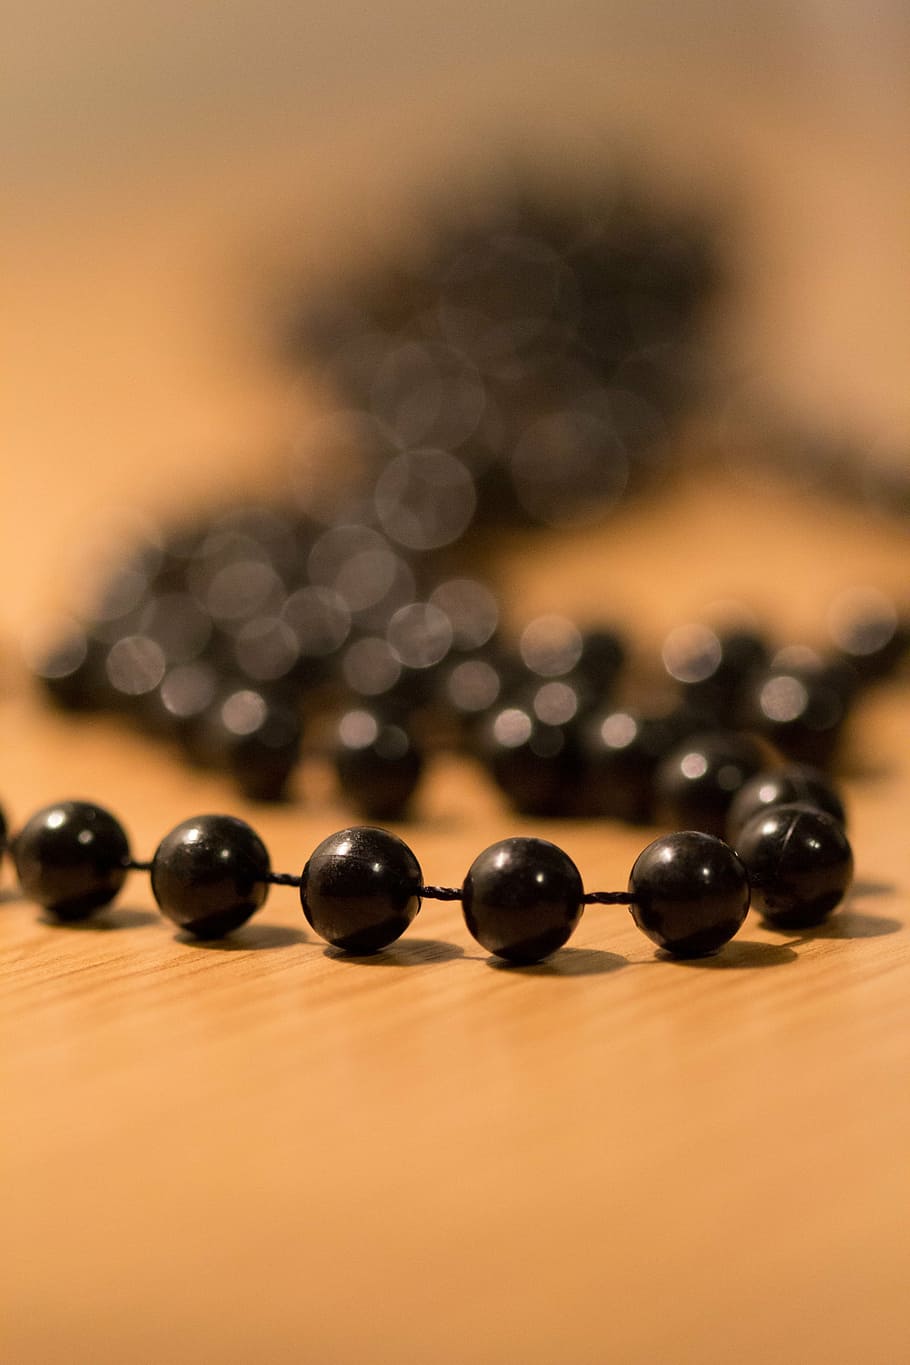 beads, pearl, necklace, black, plastic beads, fuzzy, choker, close-up, selective focus, table